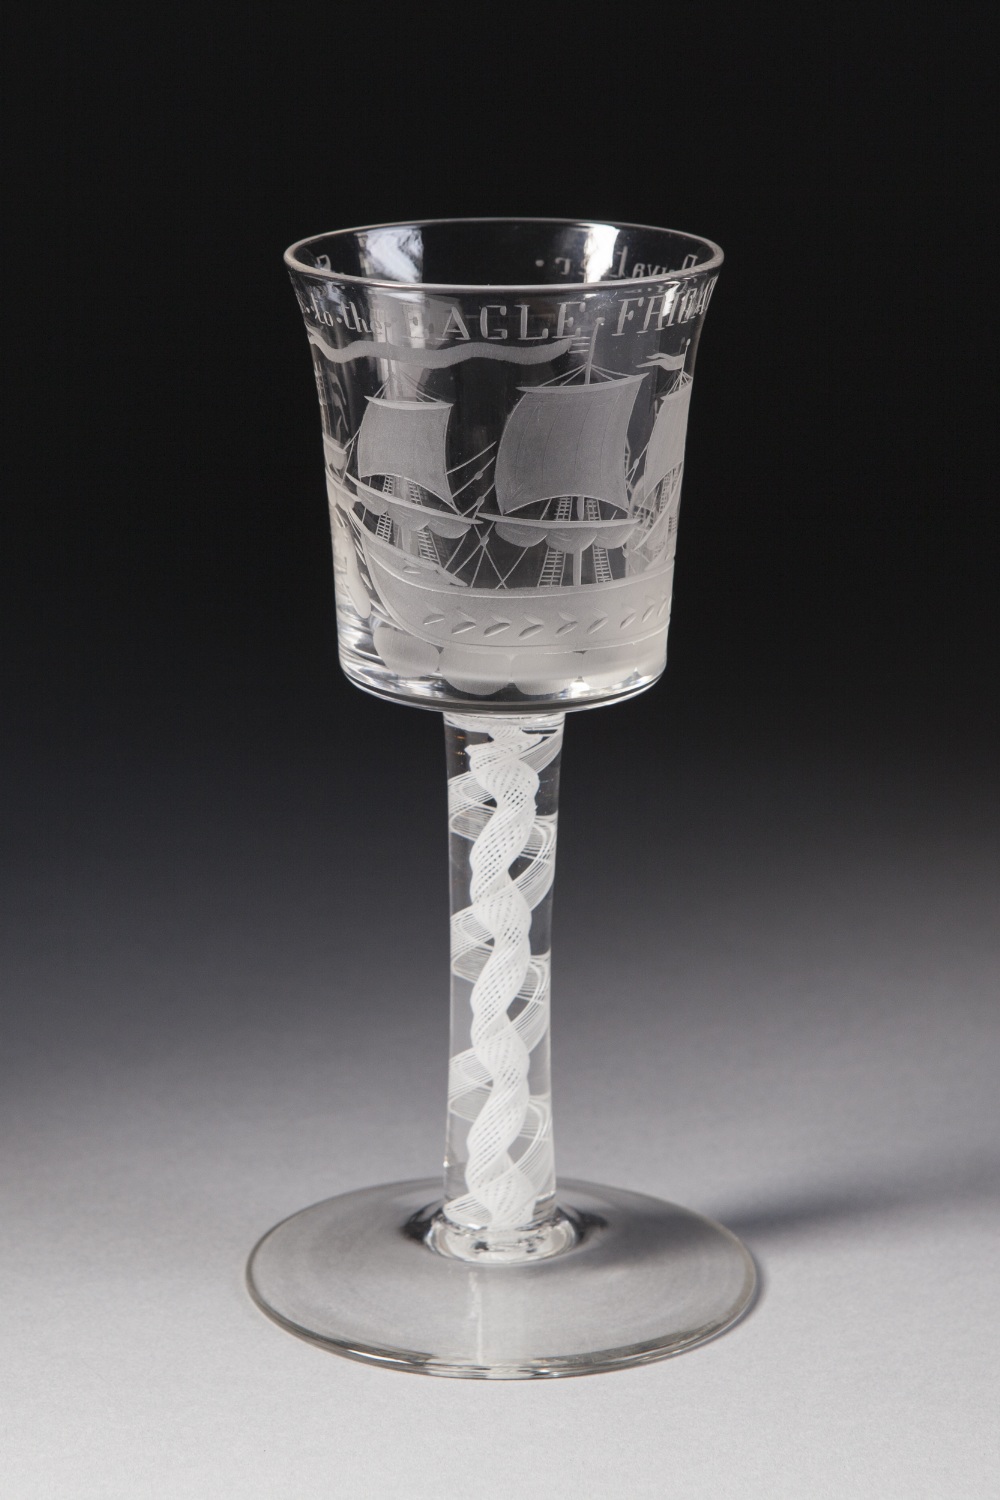 MODERN REPRODUCTION OF AN 18th CENTURY PRIVATEER WINE GLASS FOR THE EAGLE FRIGATE, the slightly